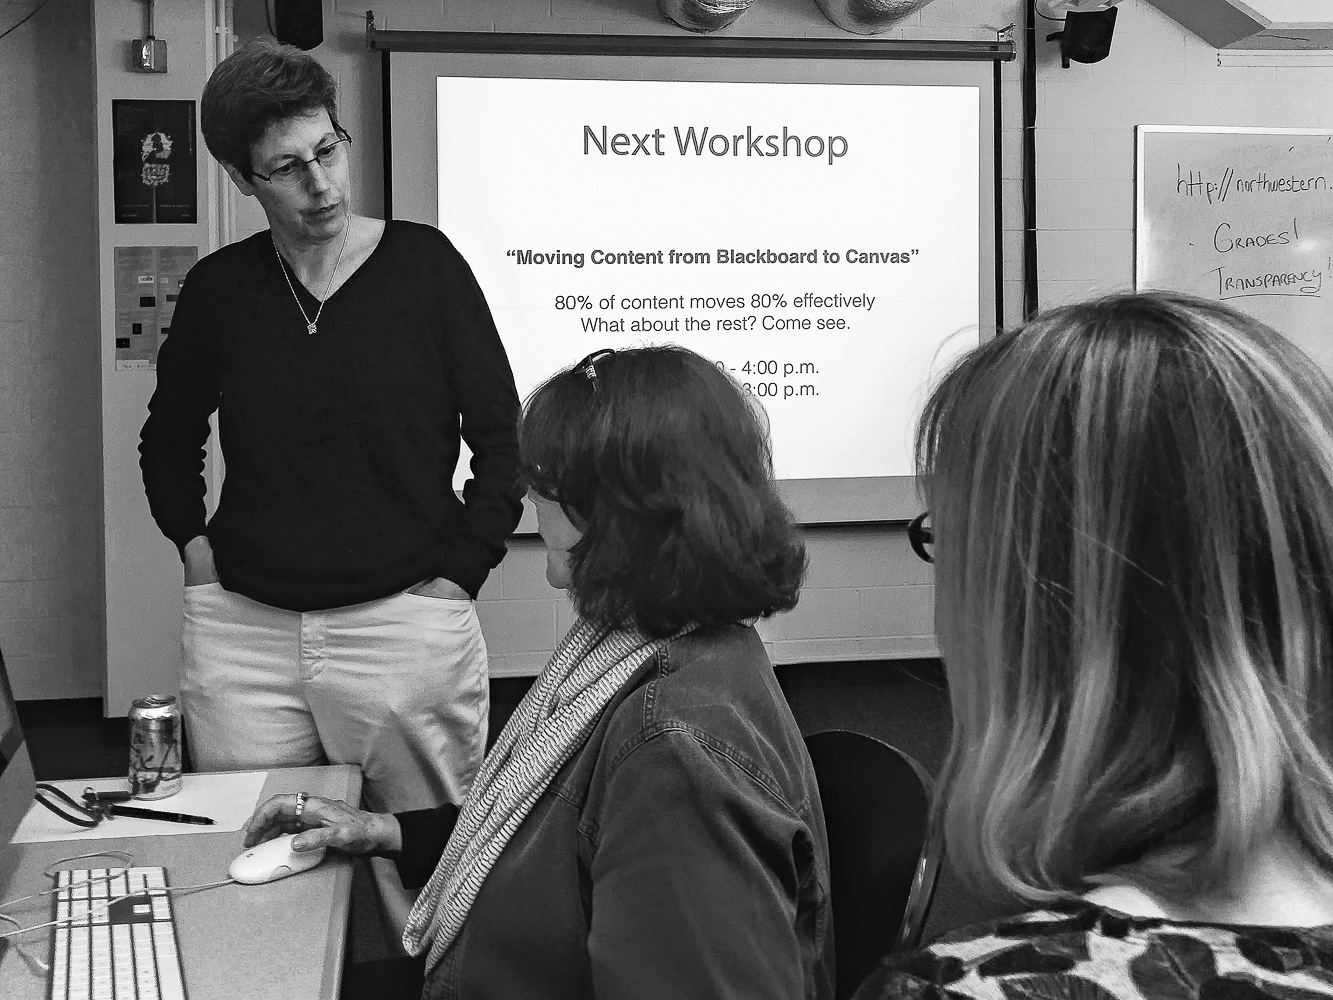 A blast from the past… the “old” MMLC lab in Kresge Hall with a co-led MMLC - NUIT workshop on migrating content to Canvas…  Vicki Getis from NUIT talks with Penny Fahey (middle) as Katrin Volkner listens.